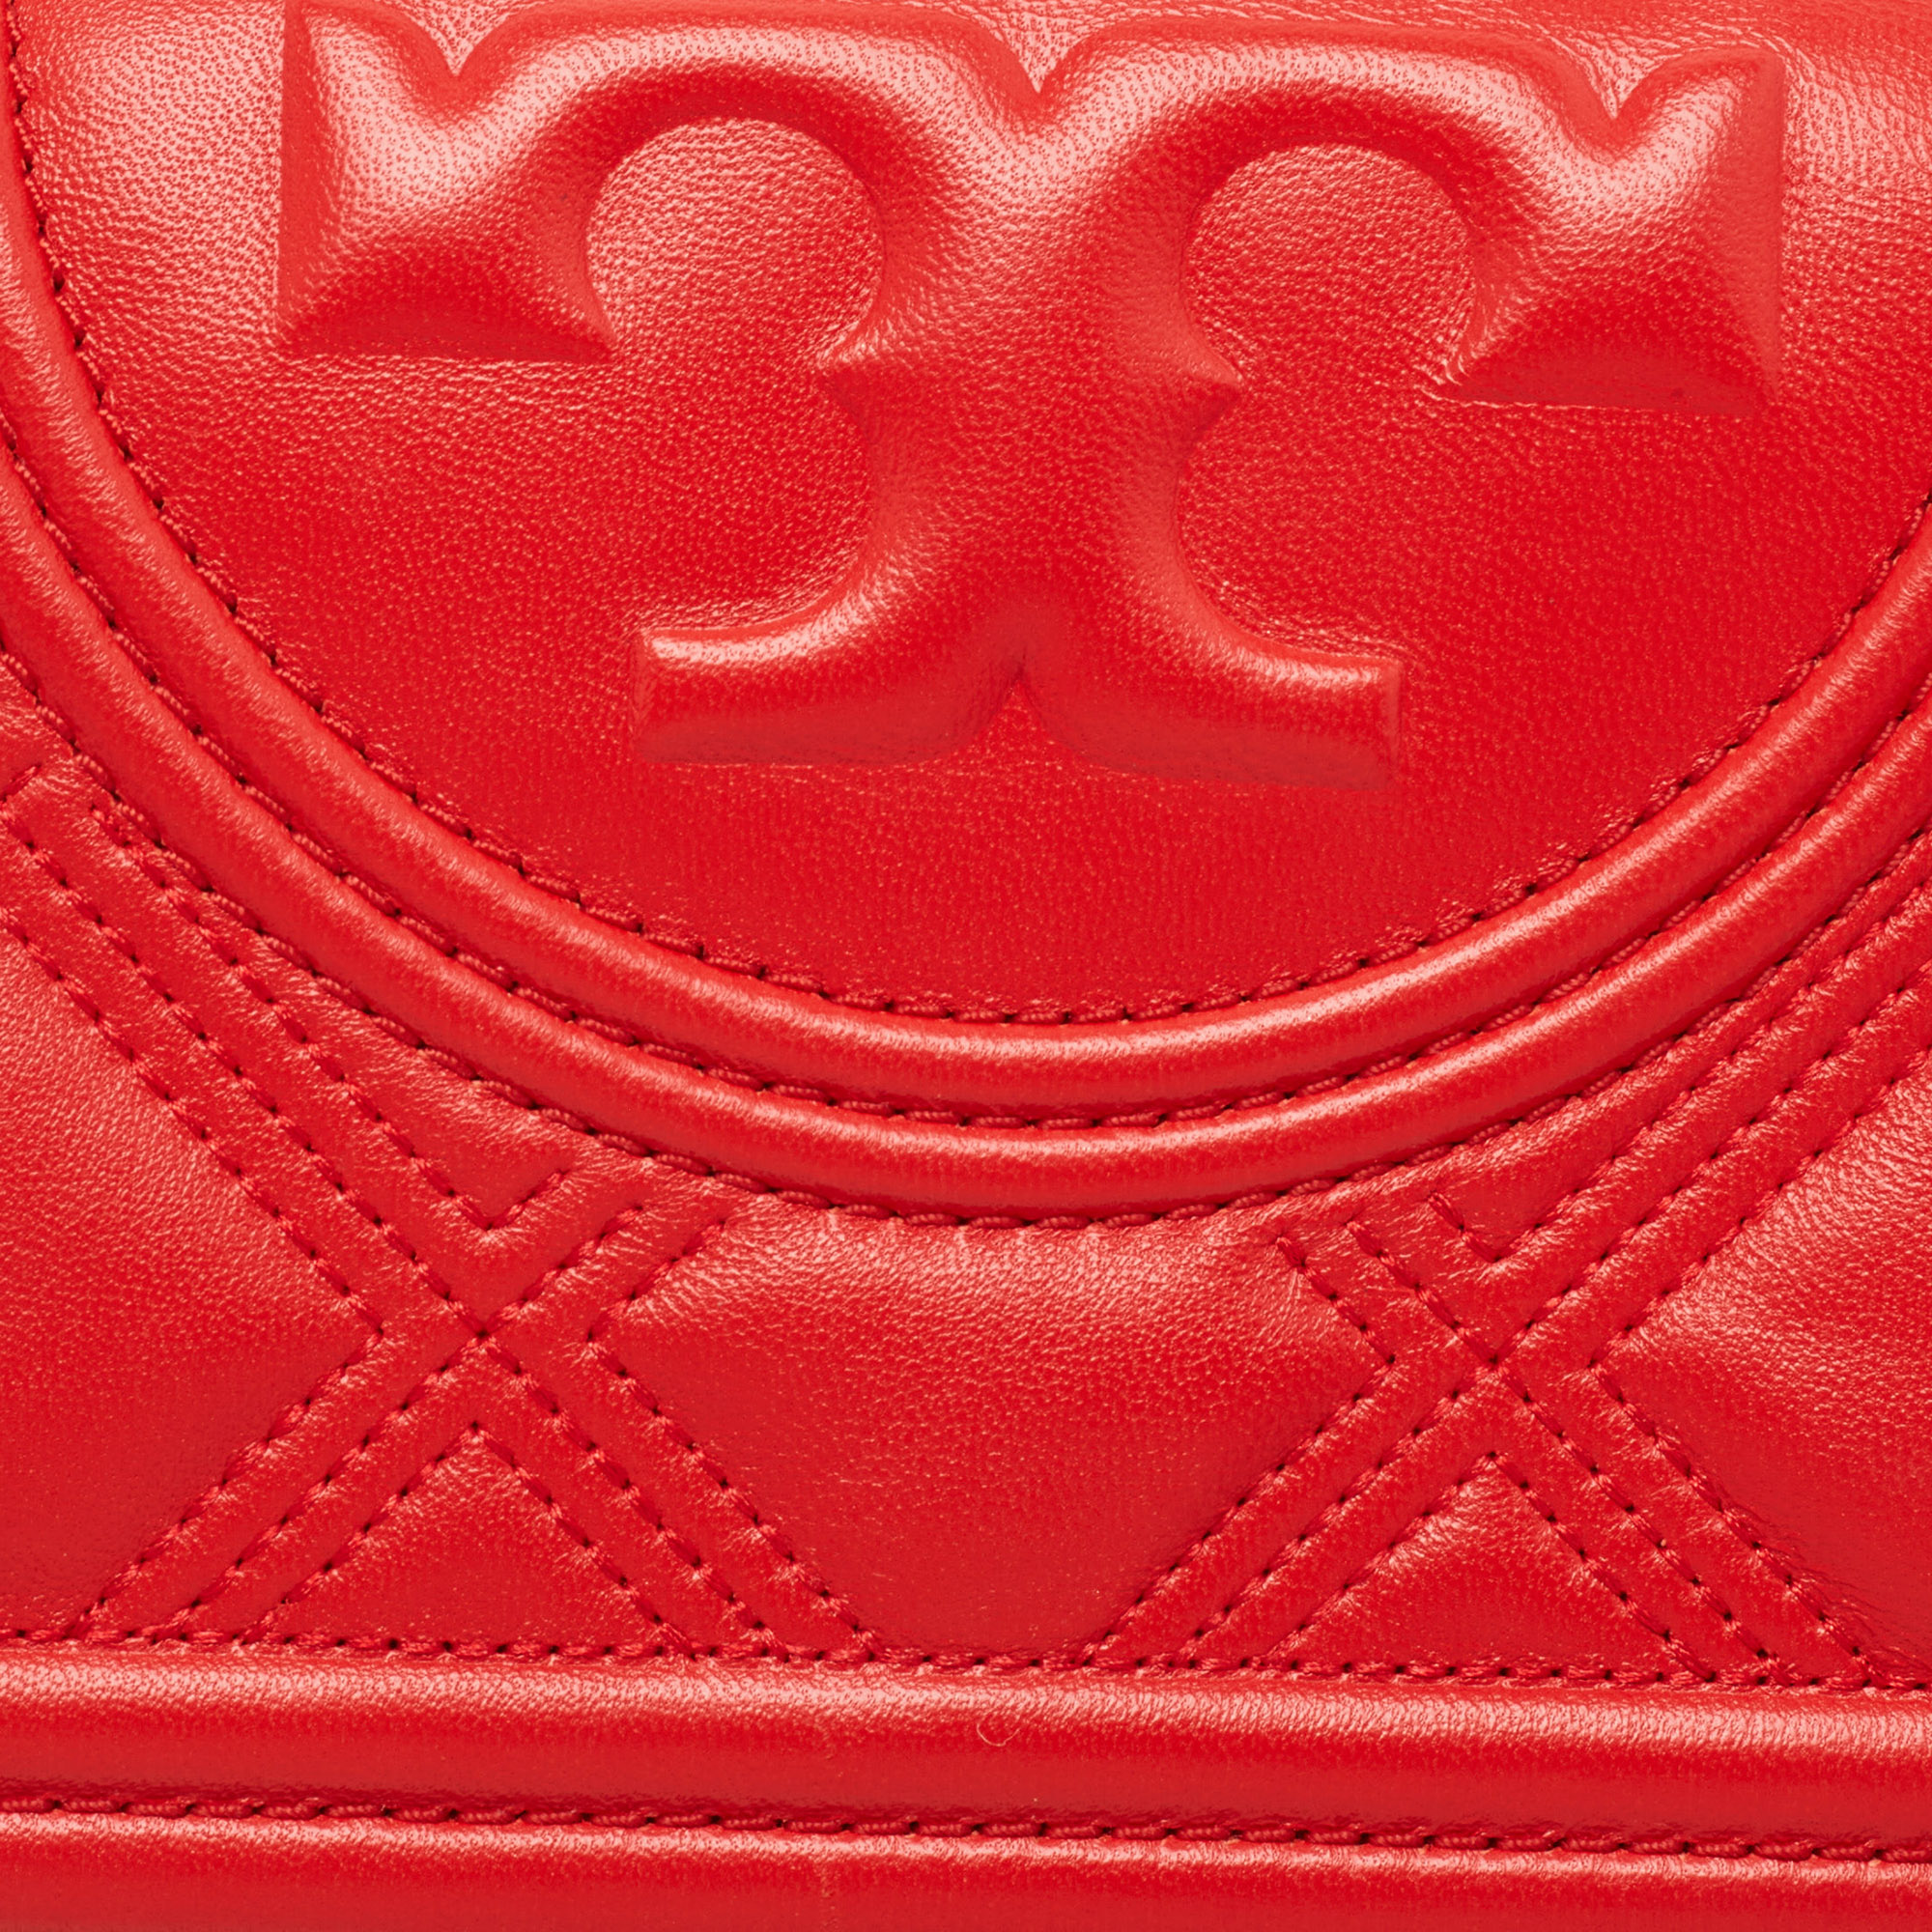 Tory Burch Red Quilted Leather Fleming Clutch